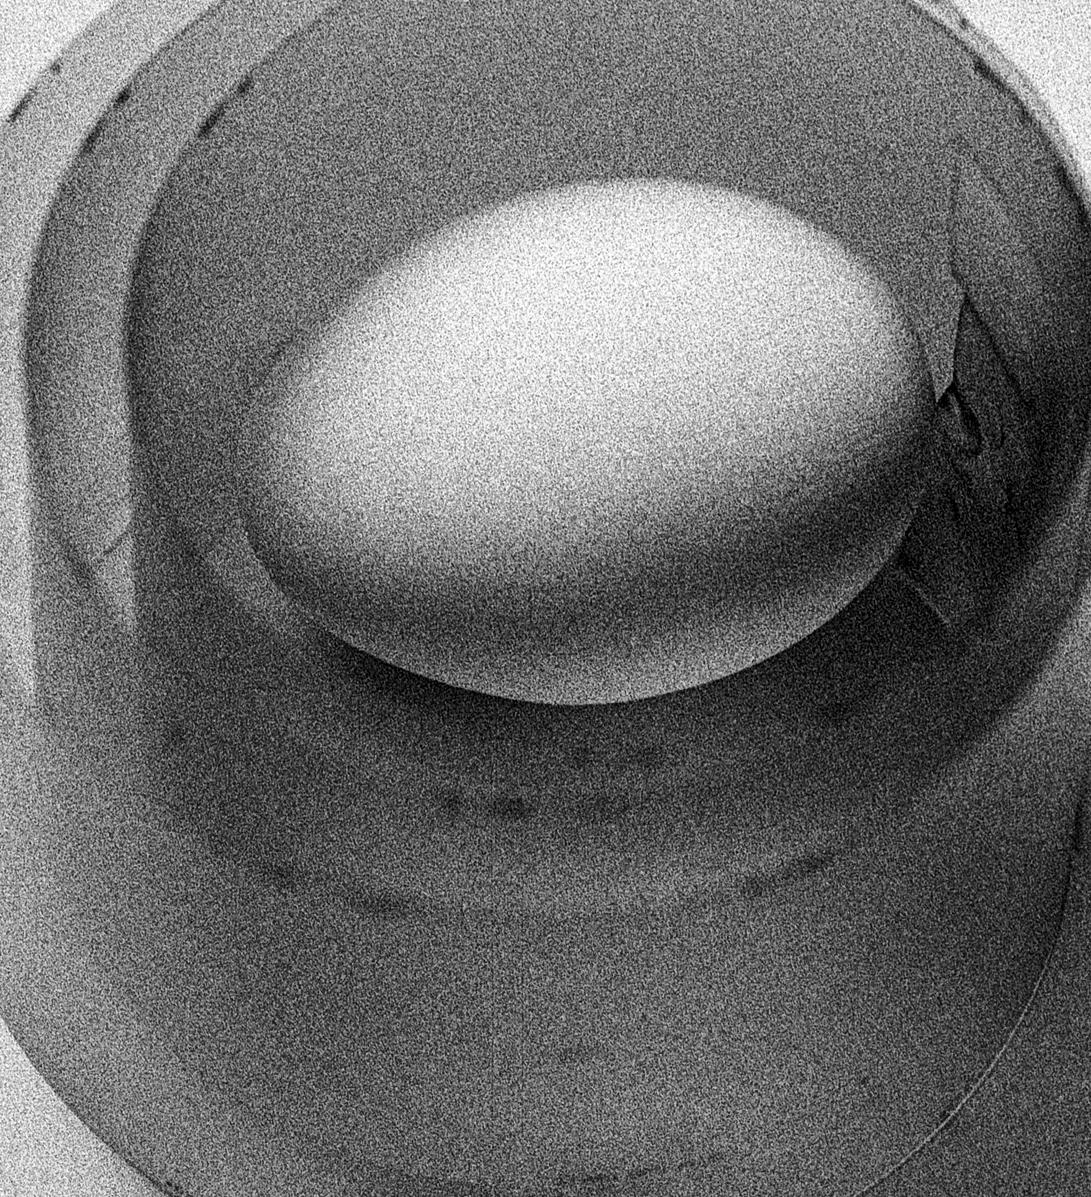 Egg Study 6, 7, and 8 (Triptych), 2021 by Shine Huang
Silver gelatin print on Ilford Fiber Paper.
Overall size: 20 in. H x 48 in. W

Individual size:
Image size: 20 in. H x 16 in. W
Edition 1/9

Signed on verso in